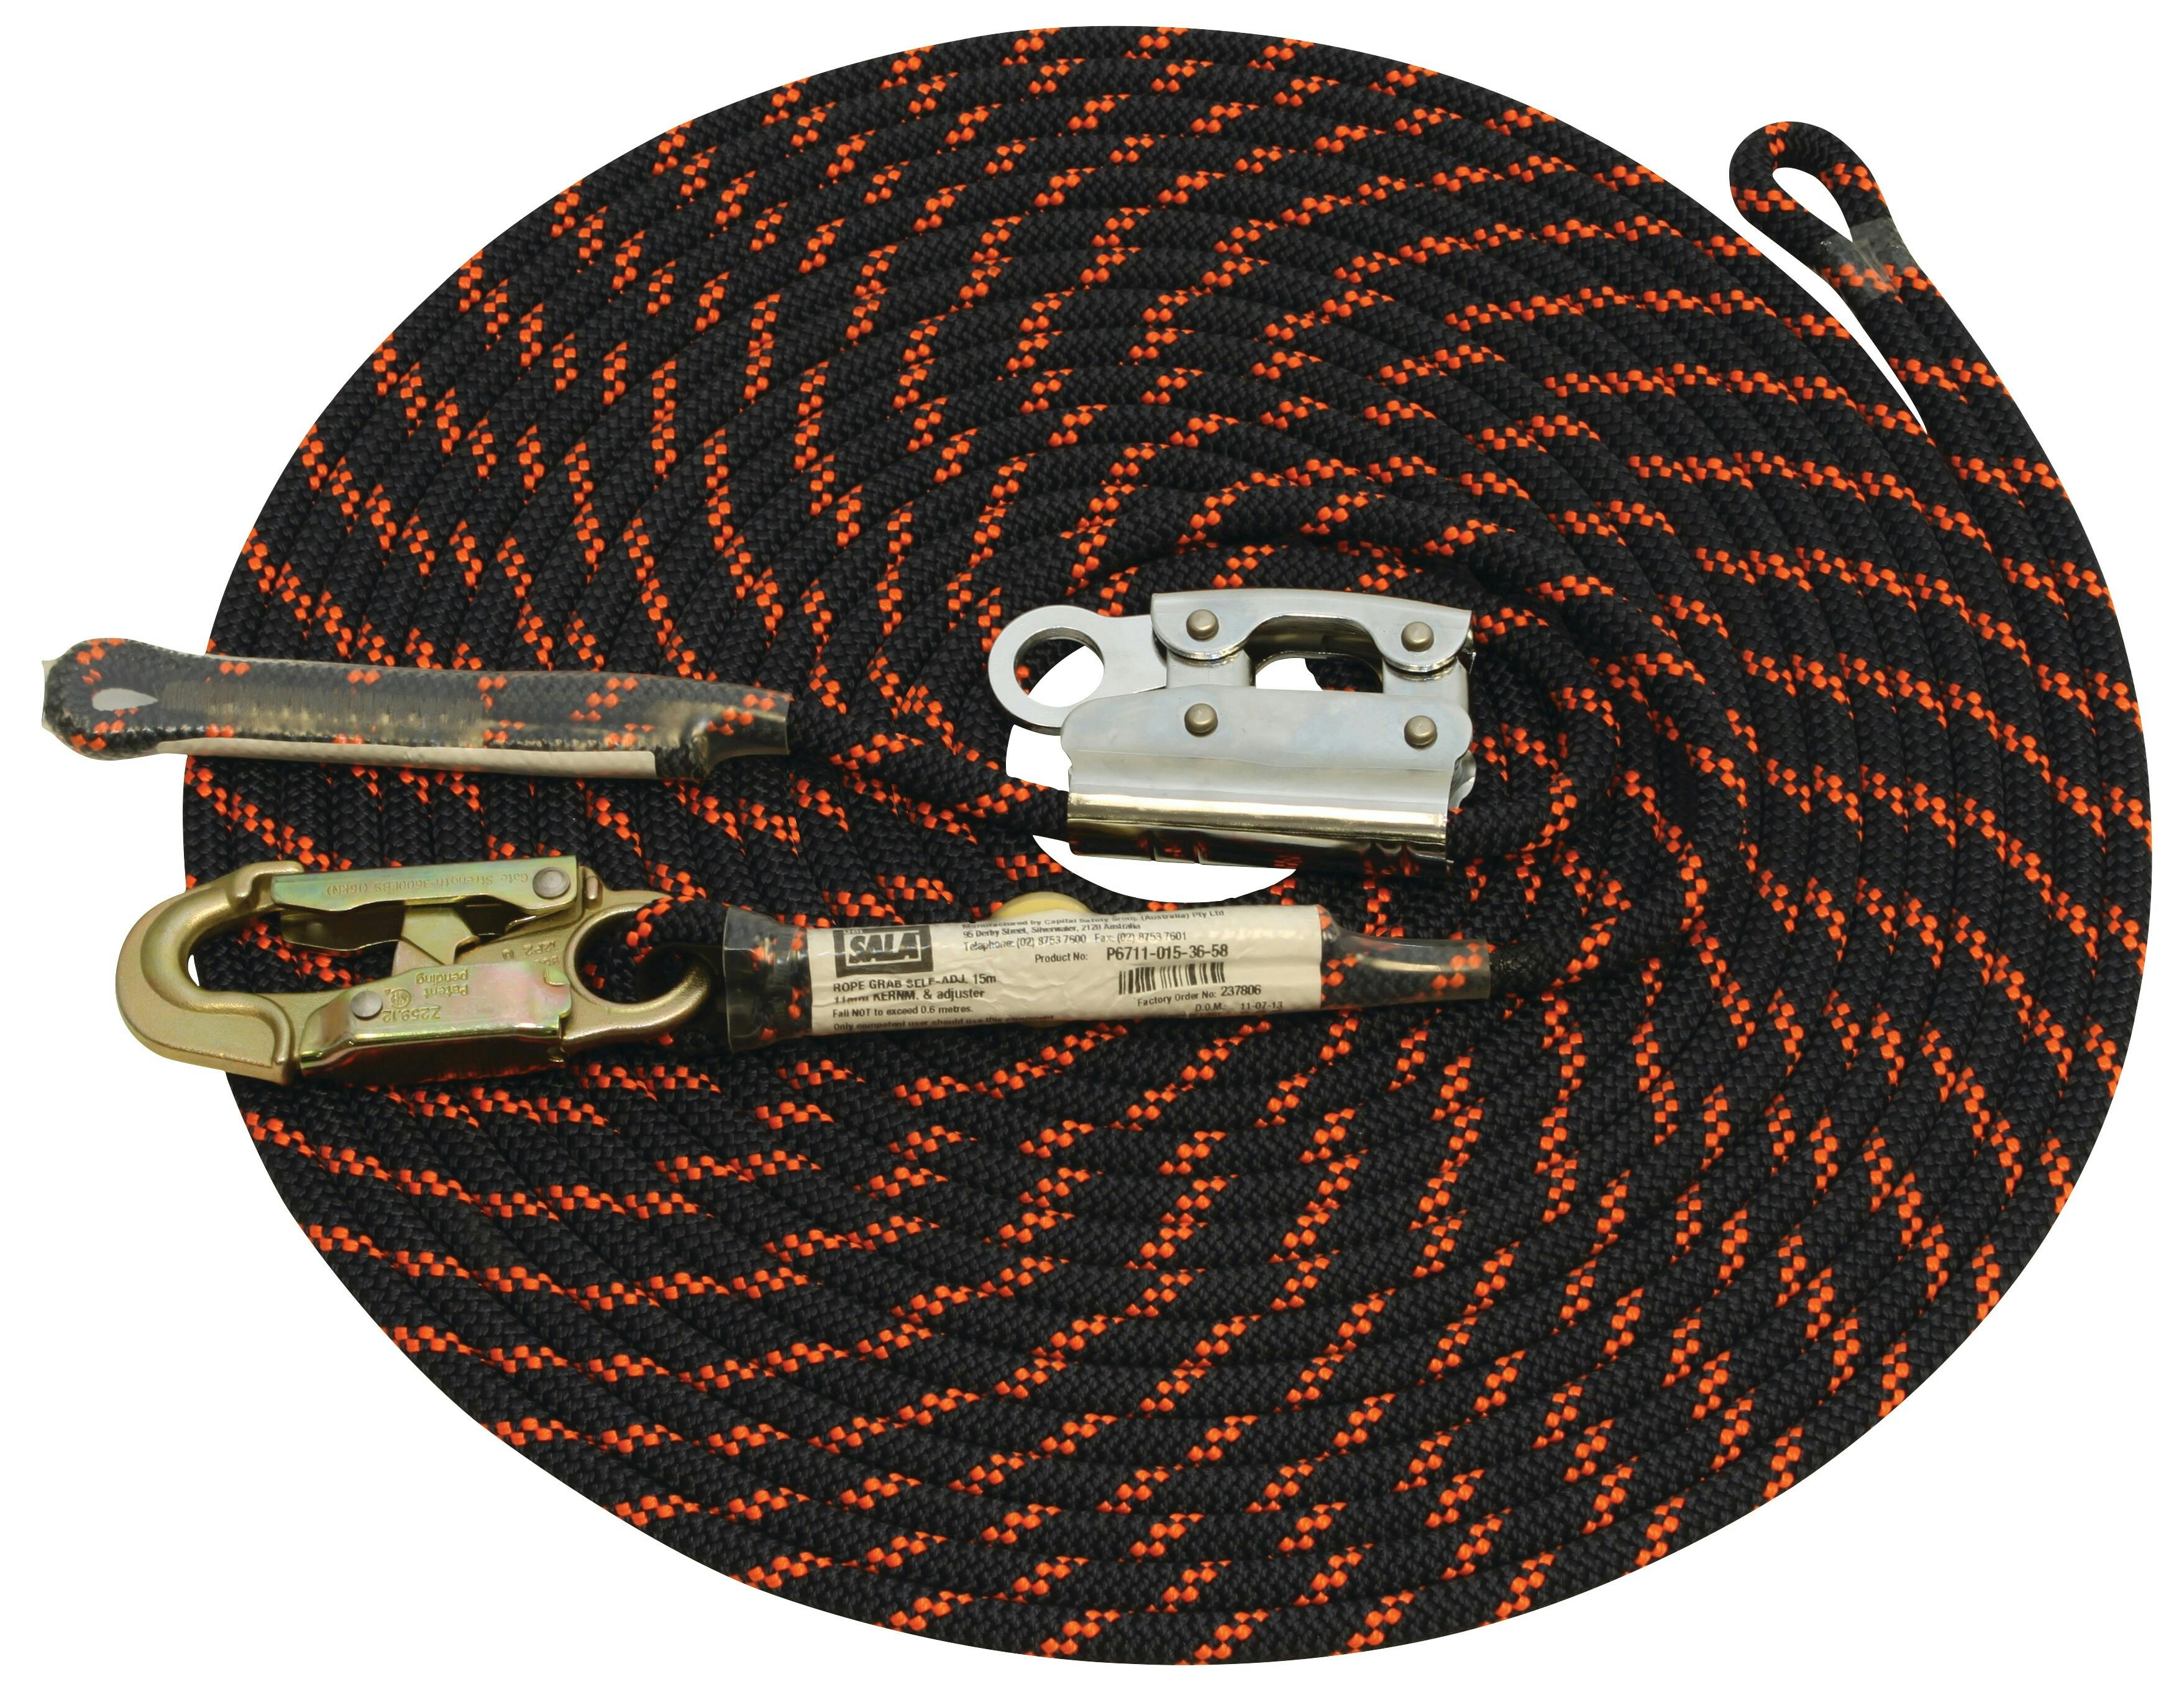 3M™ DBI-SALA® Lifeline Assembly System with integral Rope Grab P6711-025-36-58, 25 m, 1 EA/Case